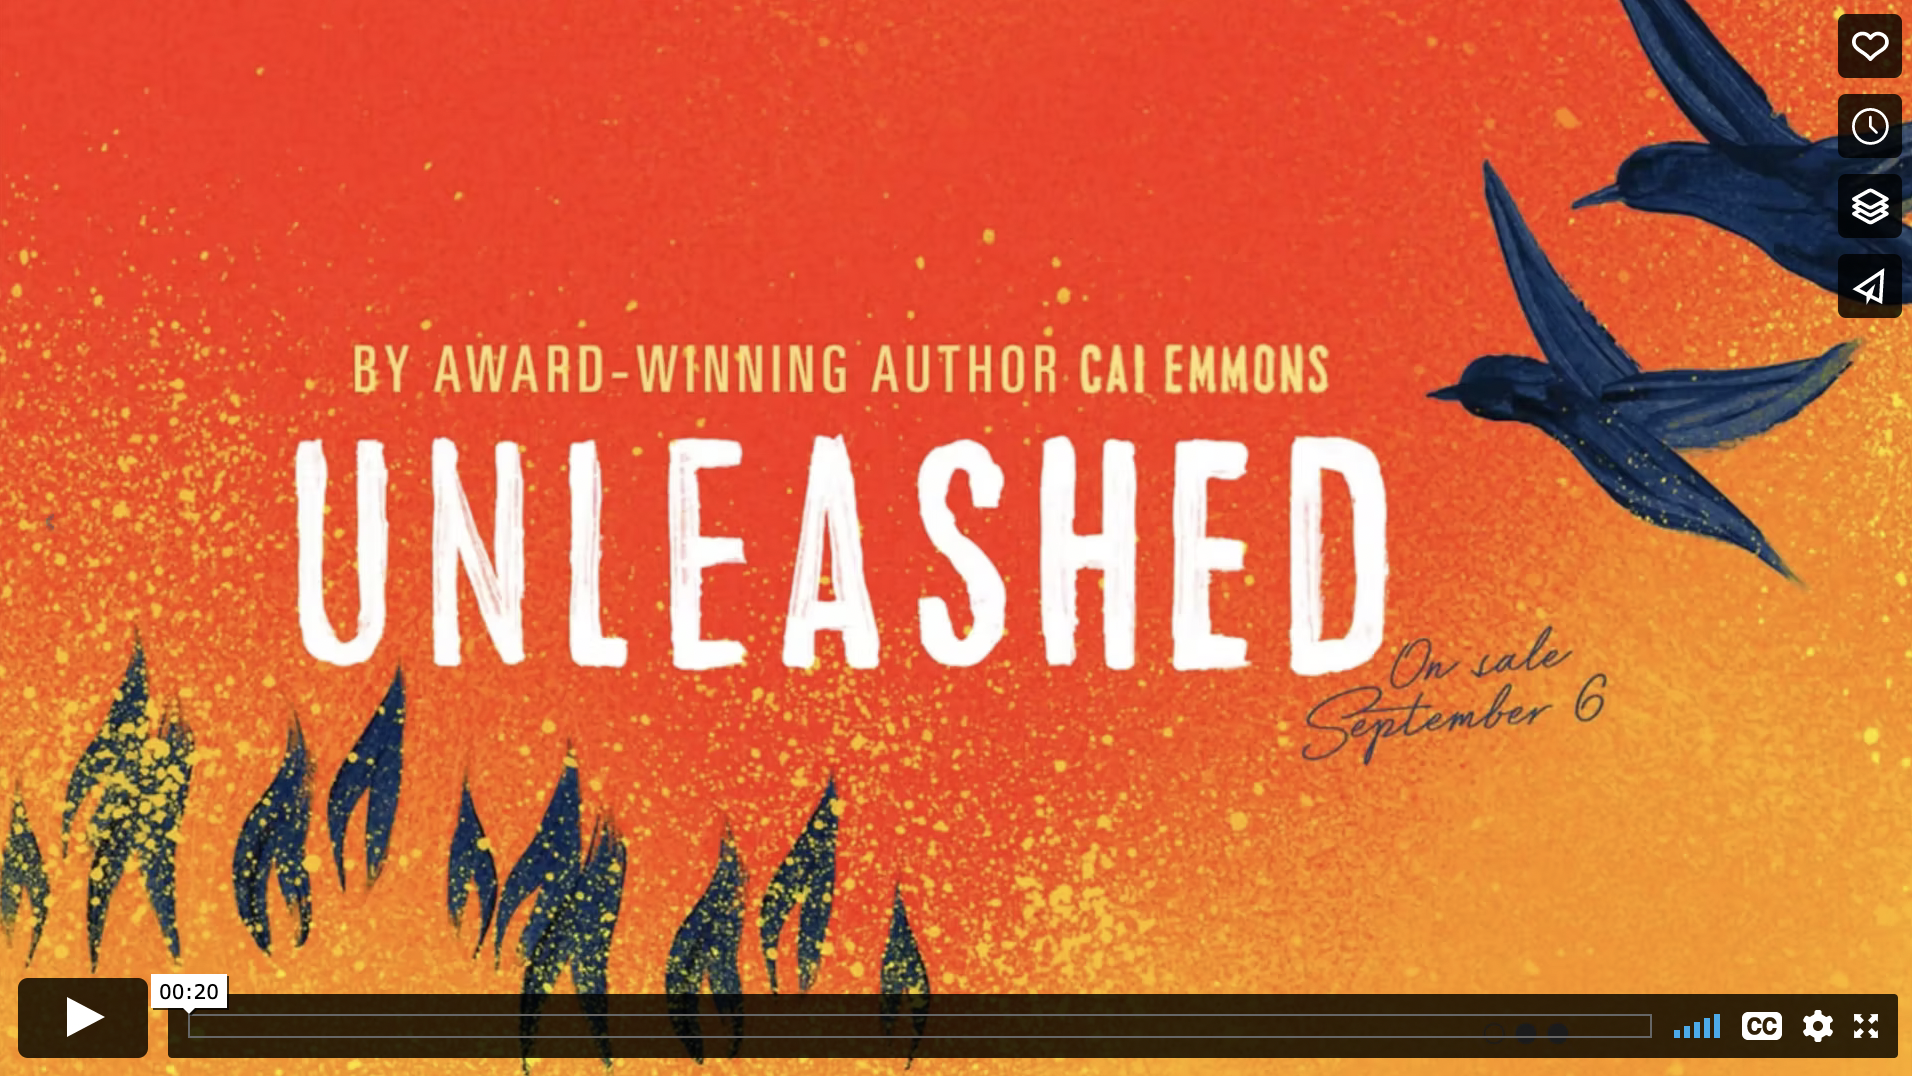 UNLEASHED trailer by Sandra Luckow